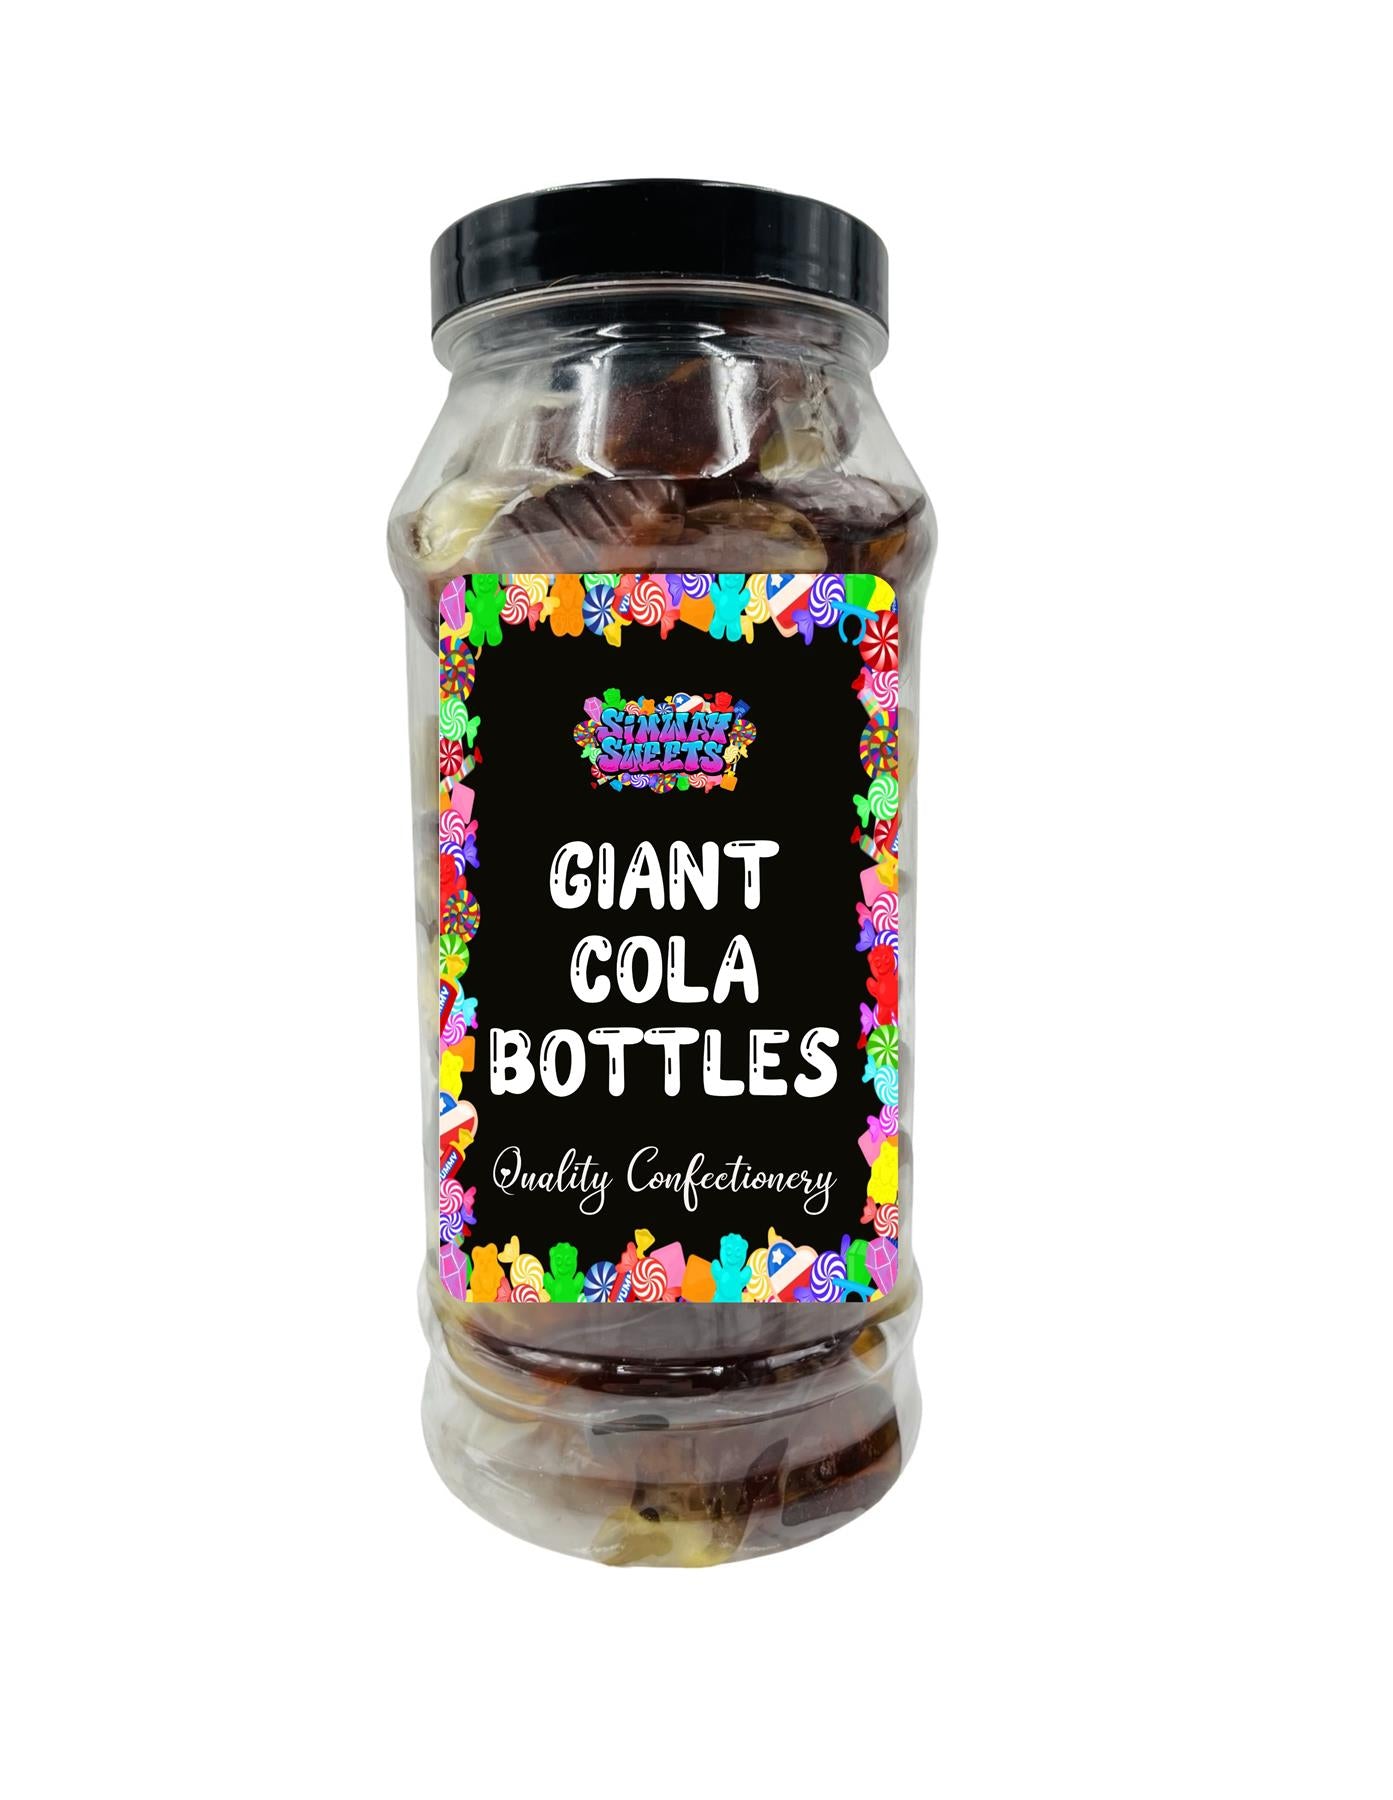 Giant Cola Bottles Retro Sweets Cola Flavoured Gummy Sweets Gift Jar - 770g